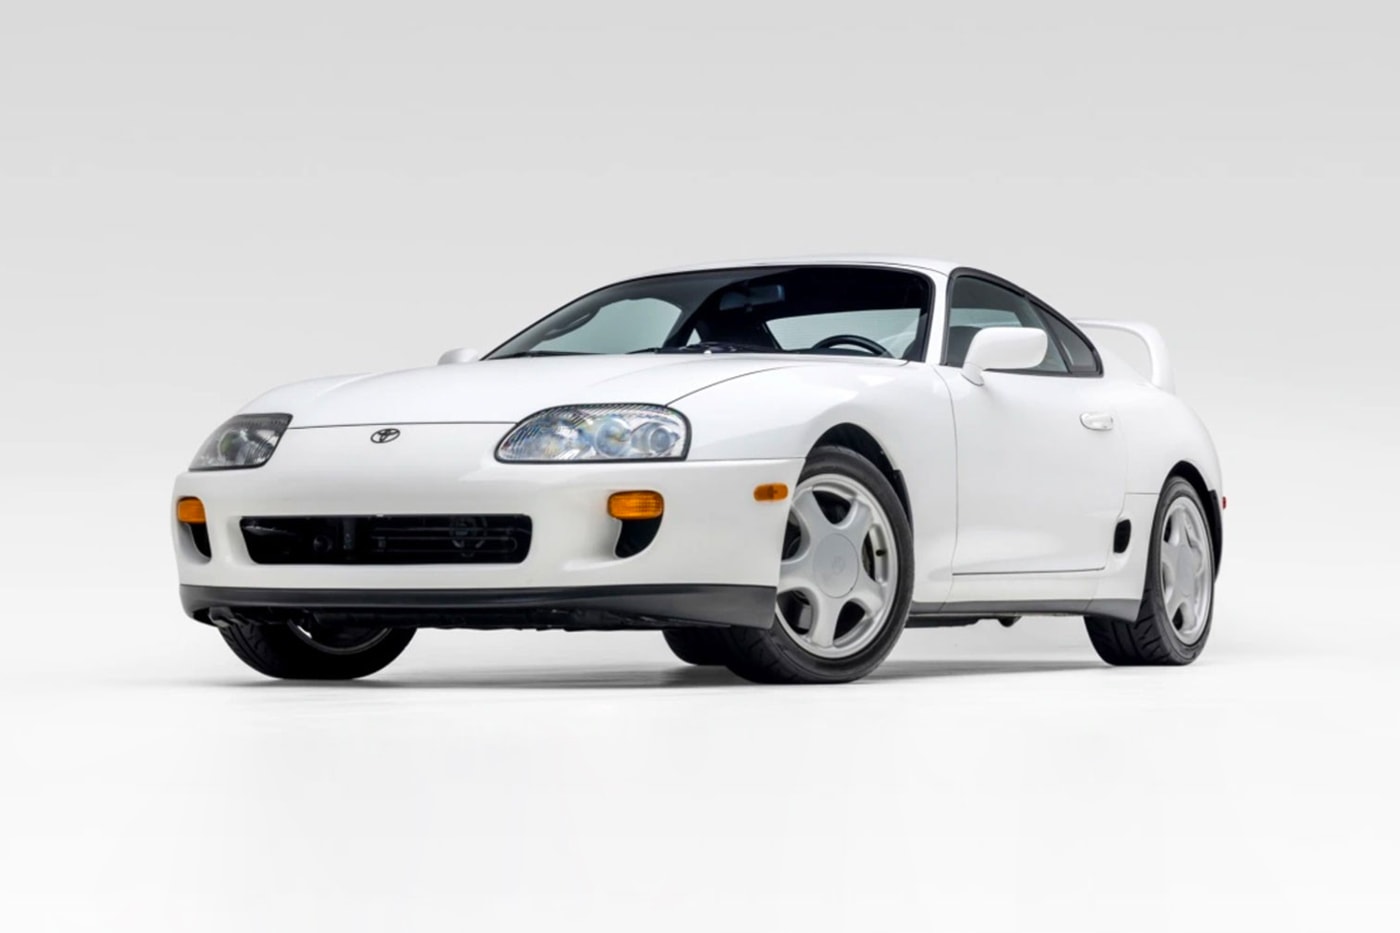 Fourth-Generation Car Vehicle Specs Features New Transmission 1994 Toyota Supra Turbo 6-Speed Auction Block Current Bid Bring a Trailer